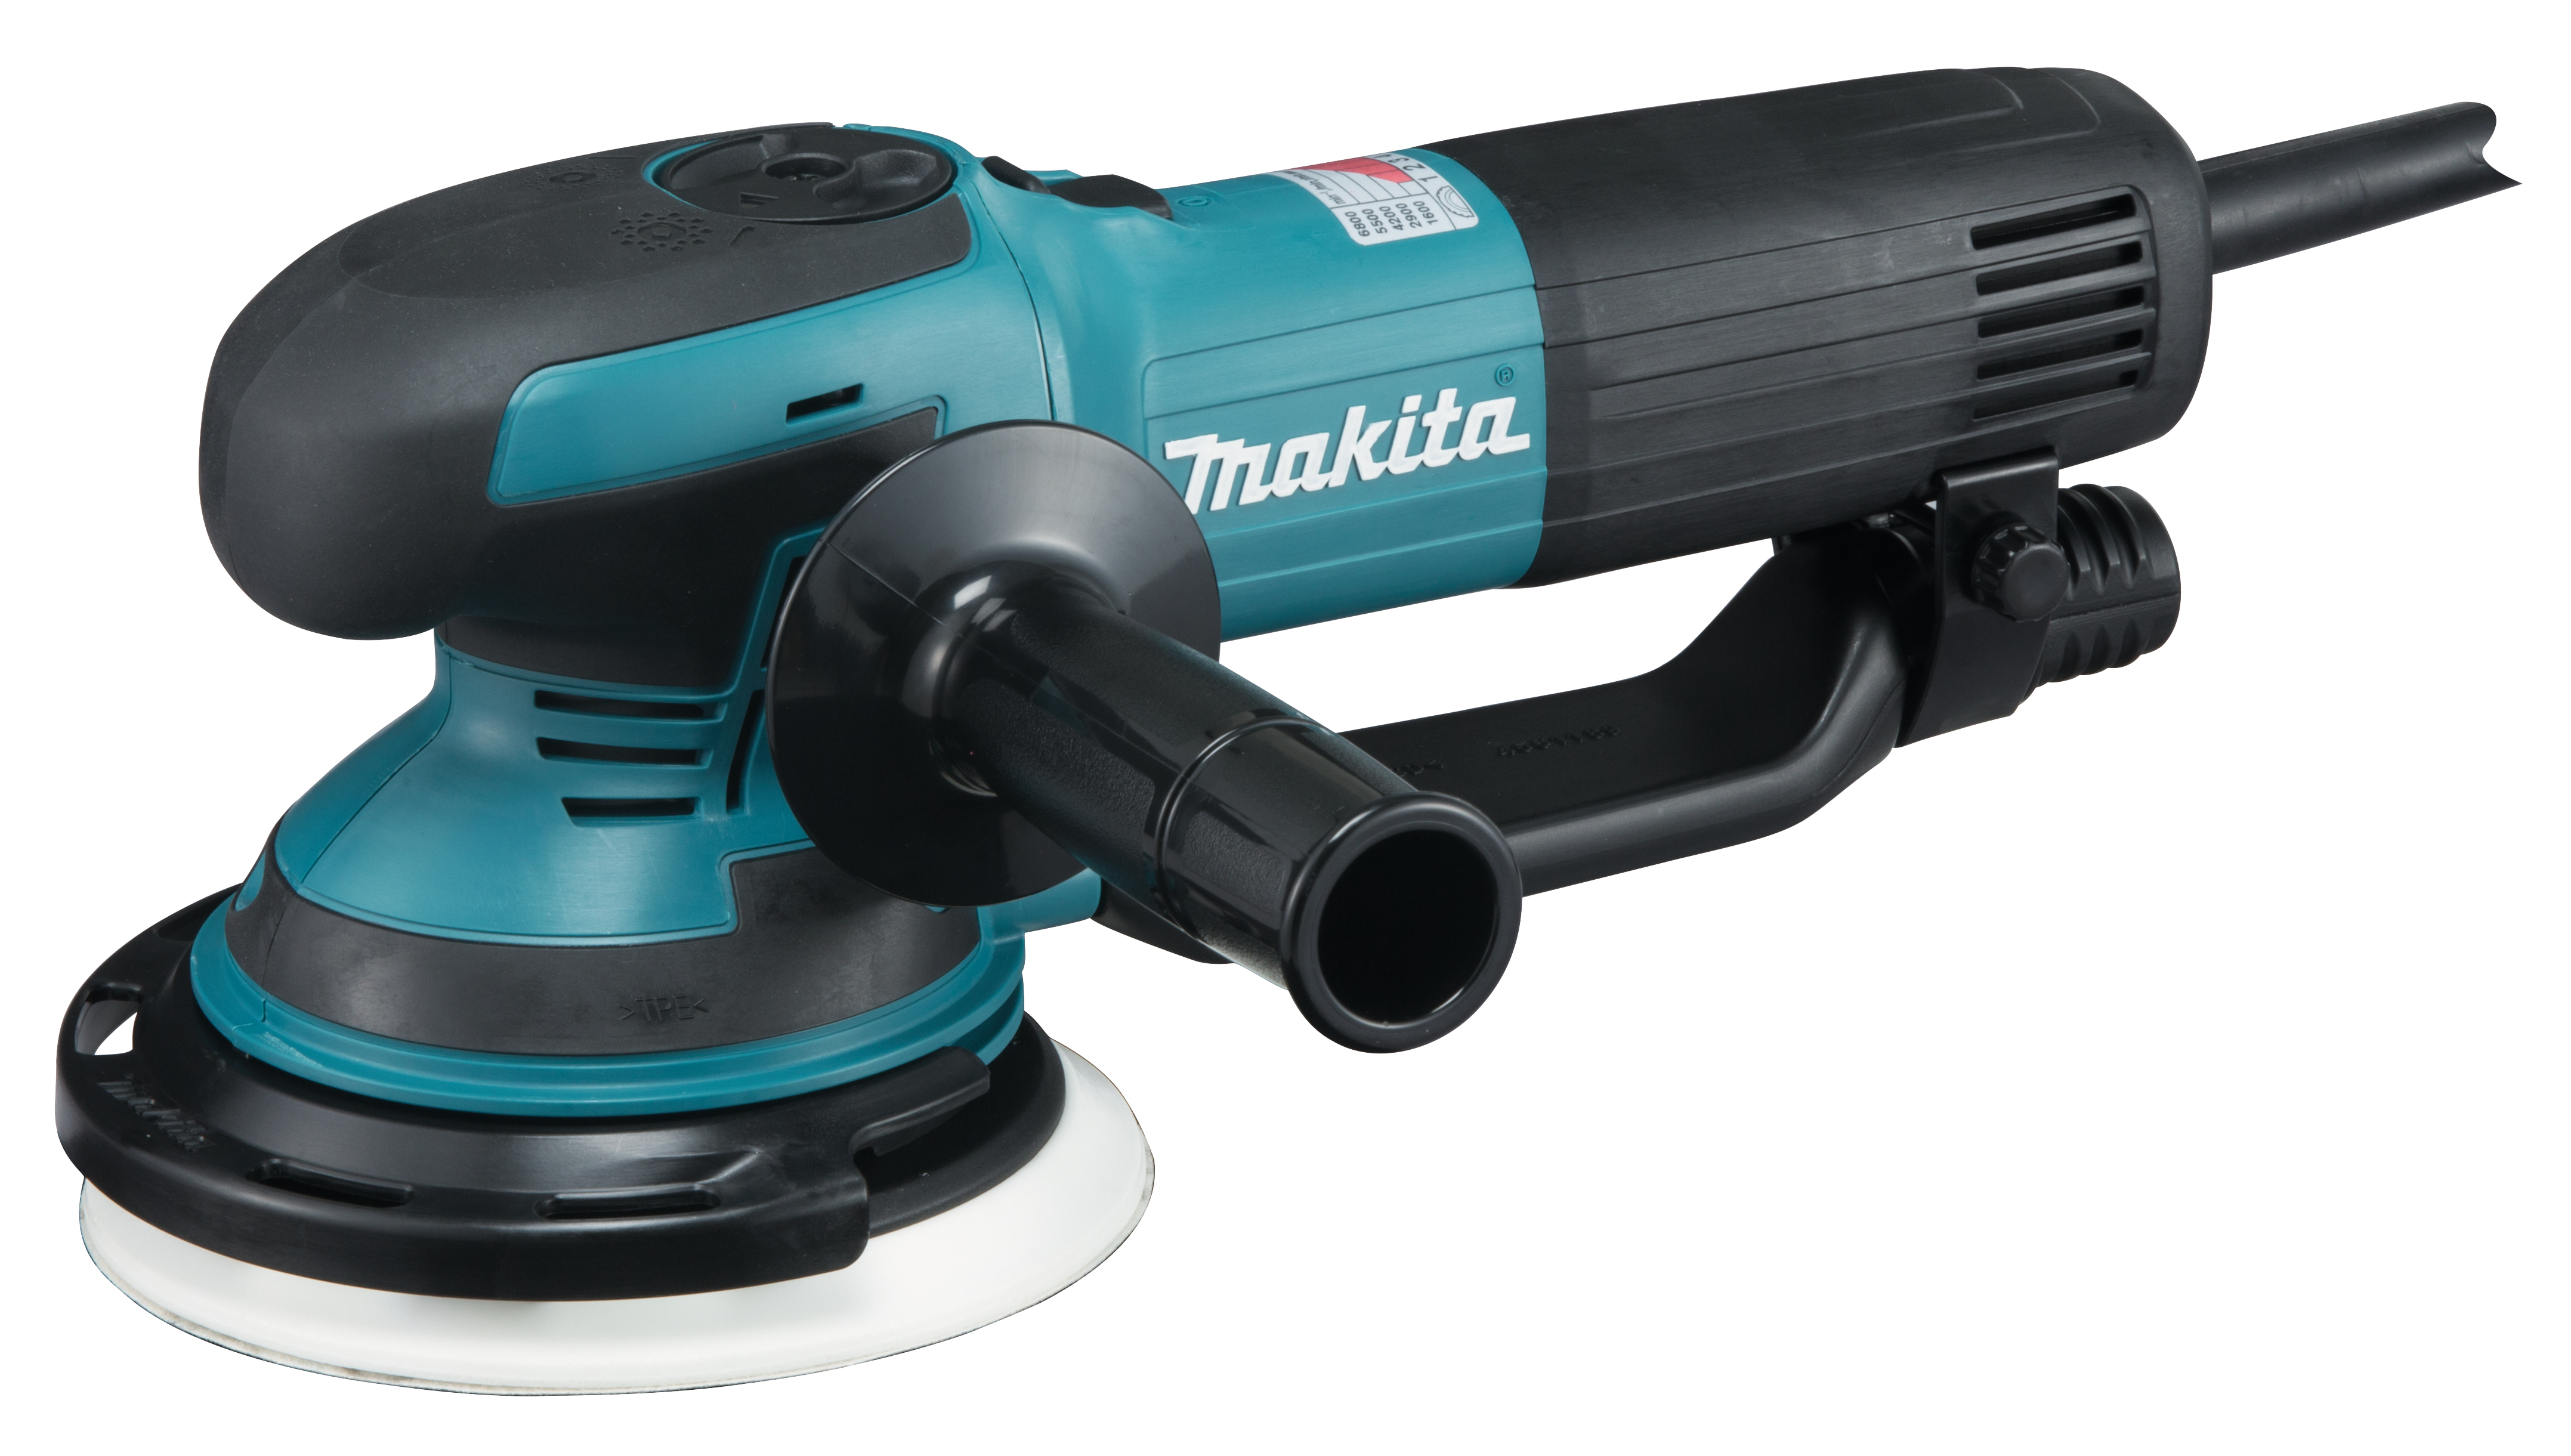 MAKITA PONCEUSE ROTO-EXCENTRIQUE 750W 150MM MAKPAC